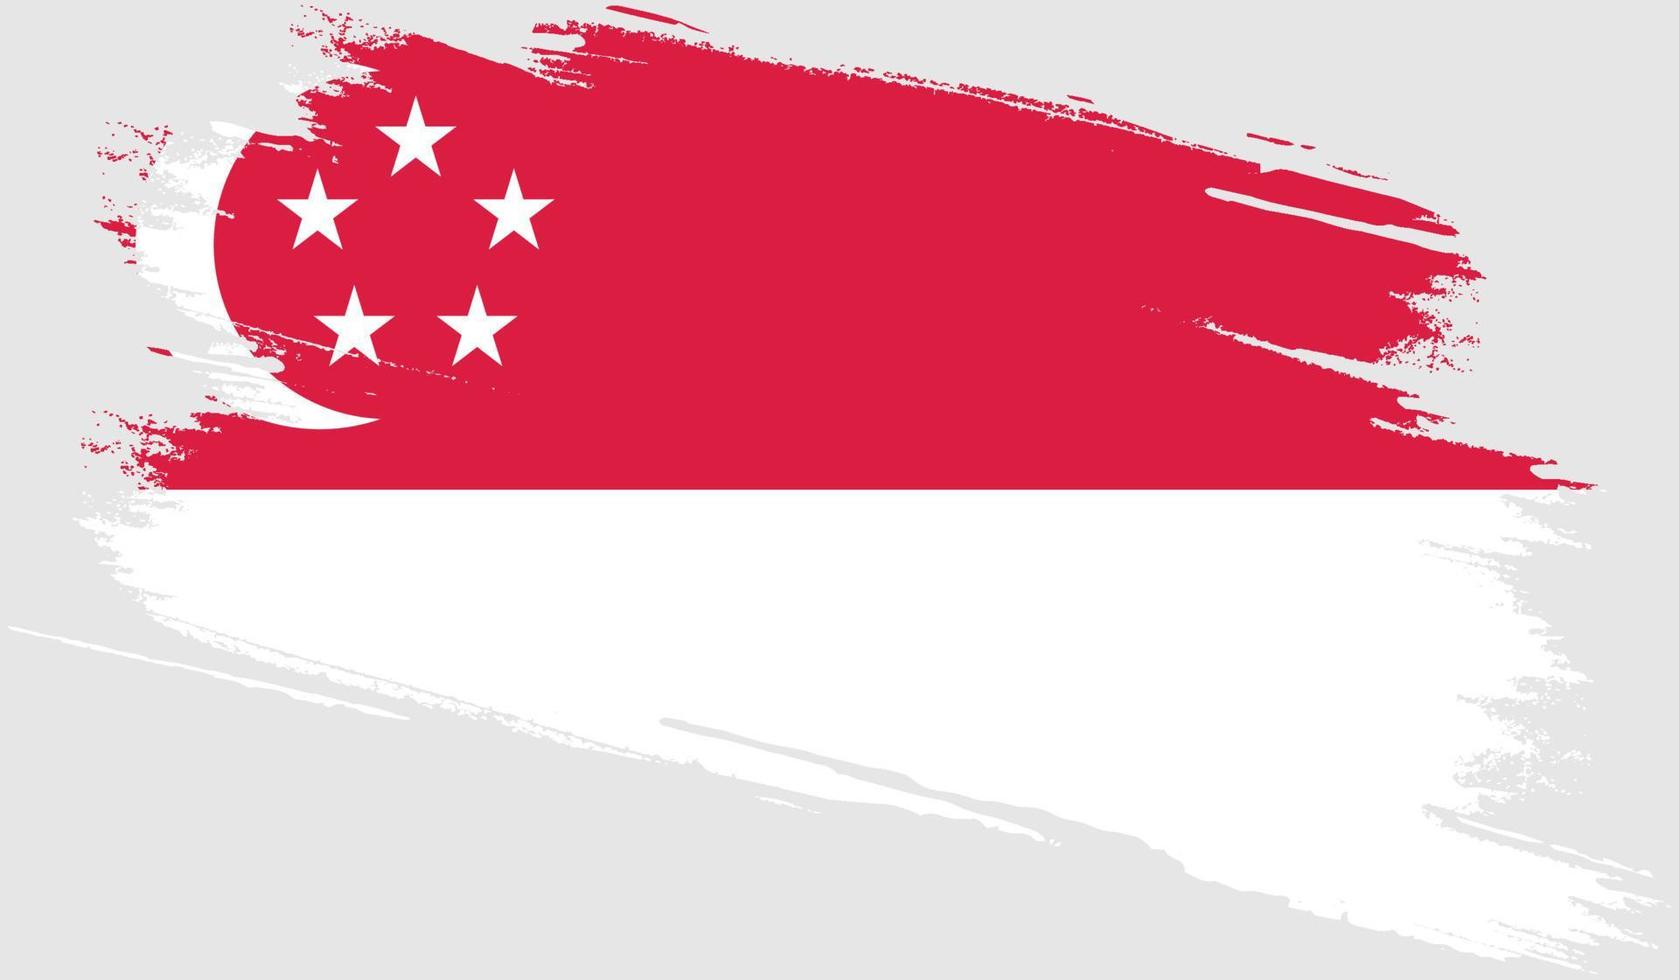 Singapore flag with grunge texture vector